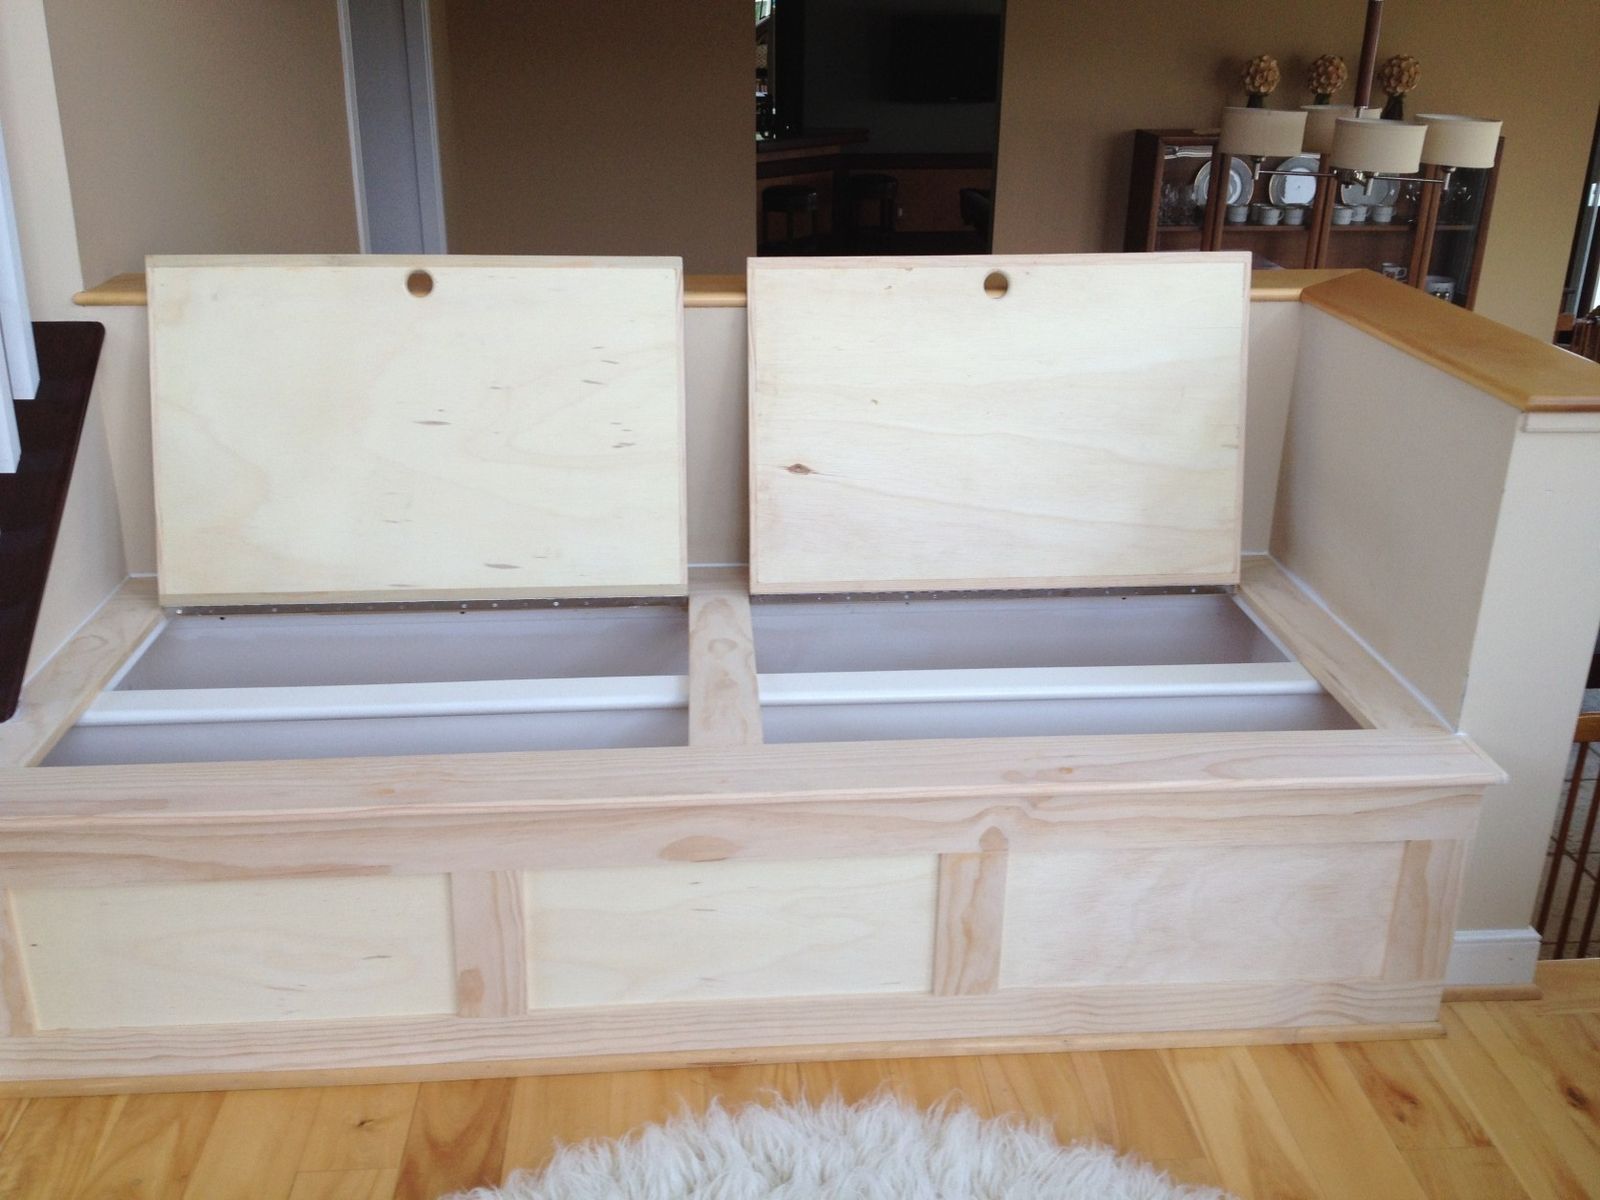 Handmade Storage Bench By Natural Woodworks CustomMadecom